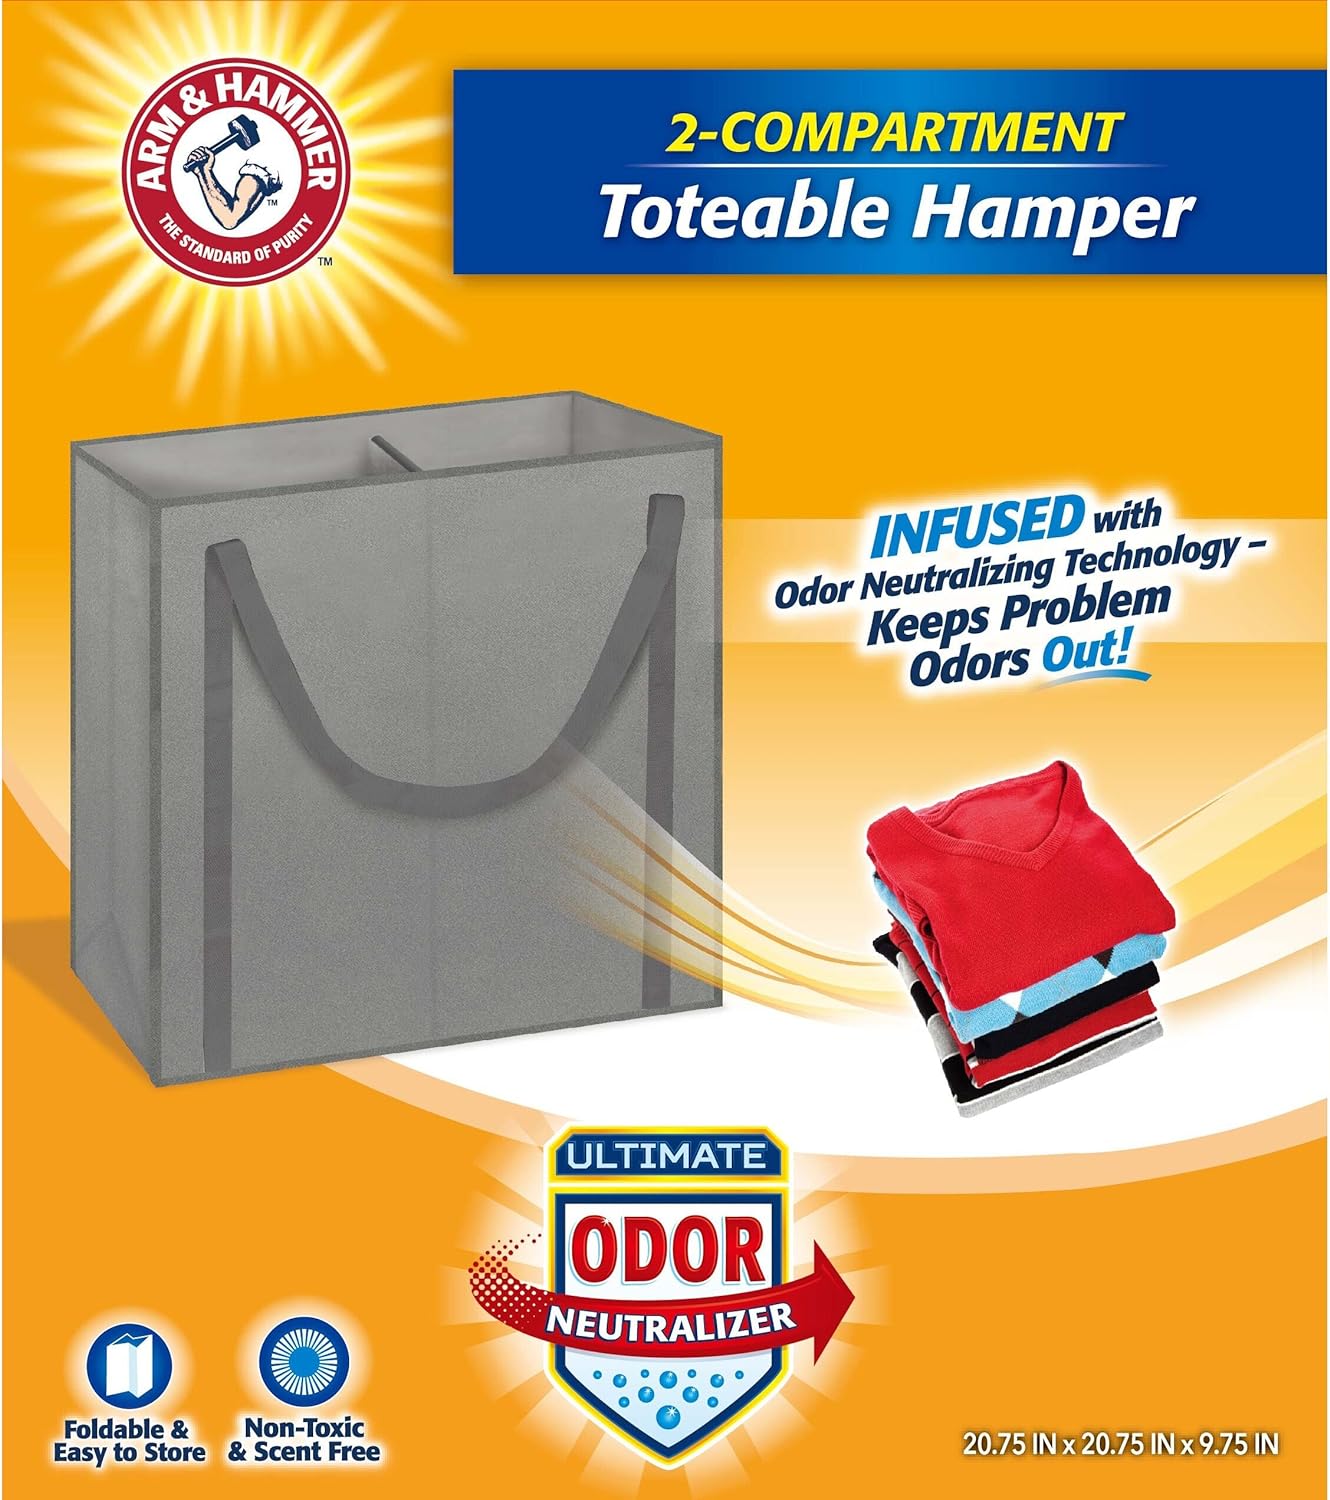 Arm & Hammer 48115, 2 Compartment Laundry Hamper Tote, Grey, 12 Pack